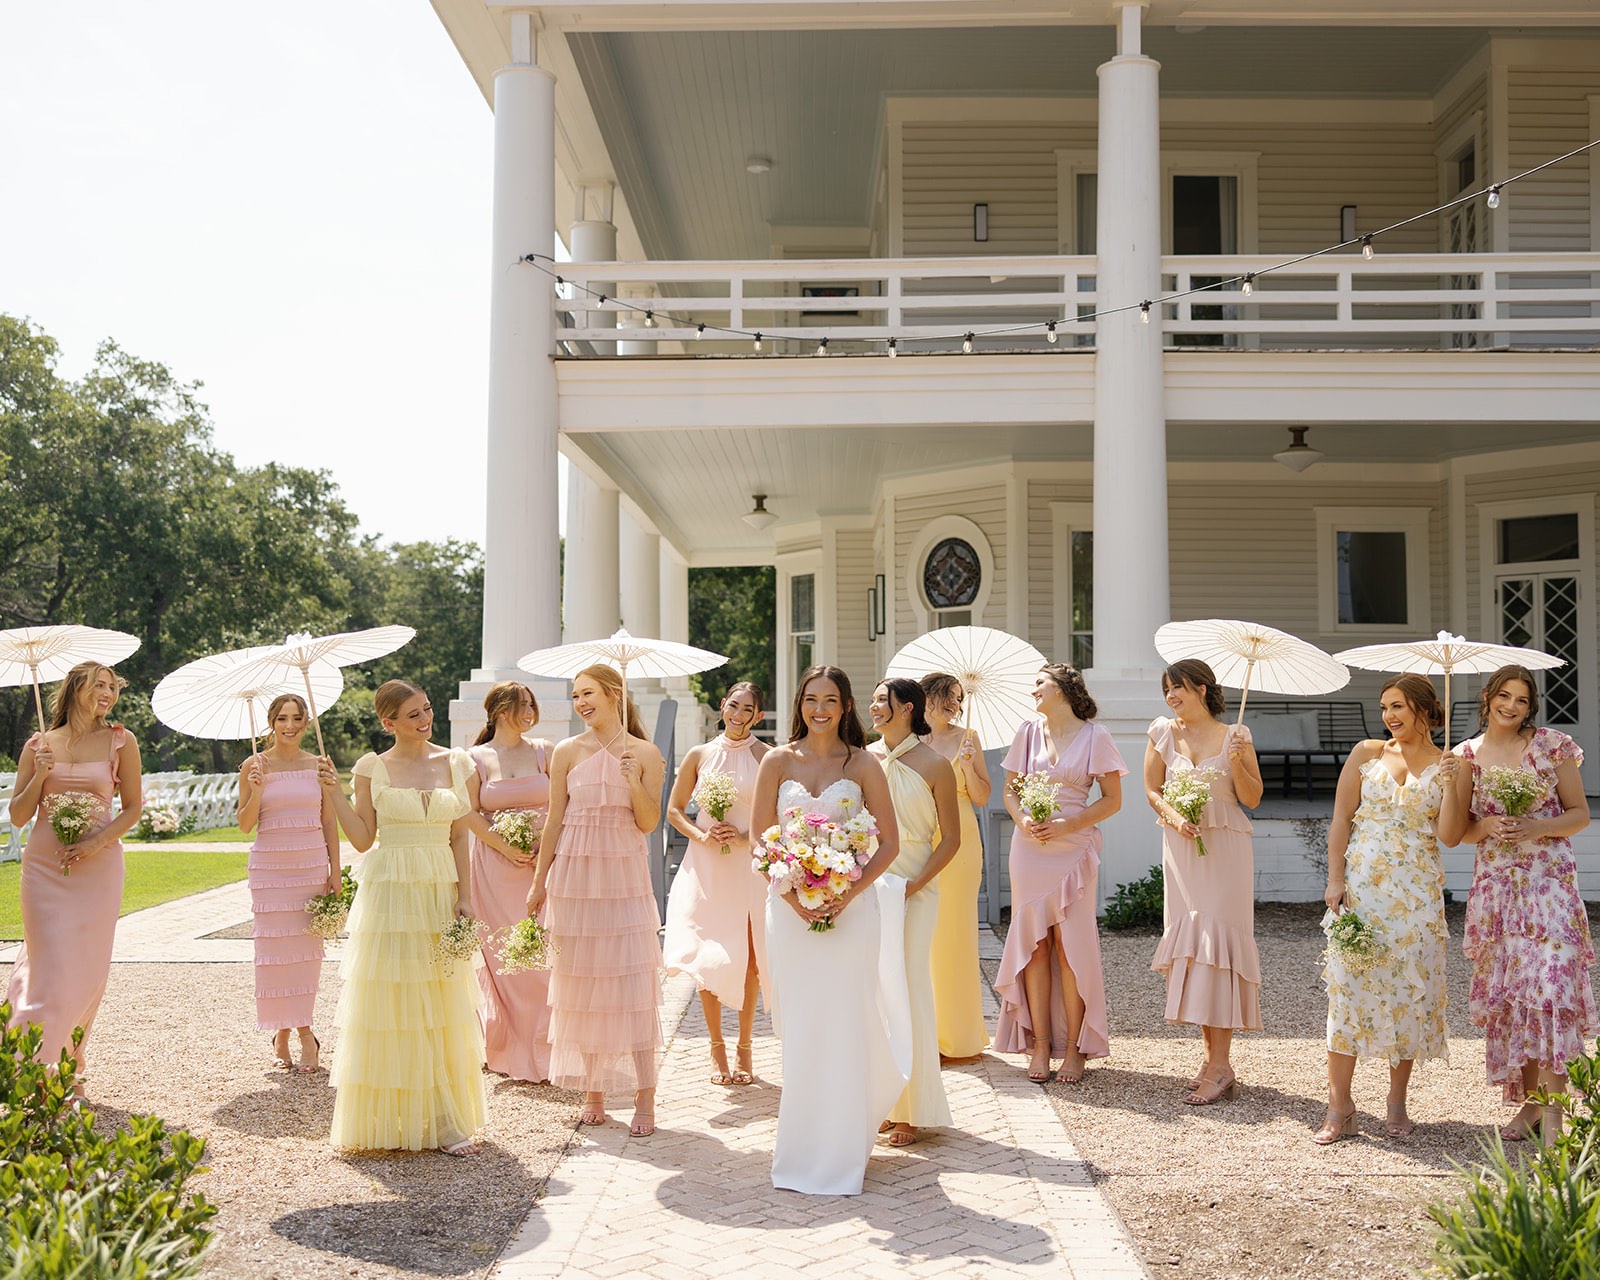 Bride and bridesmaids in mismatched pink and yellow dresses